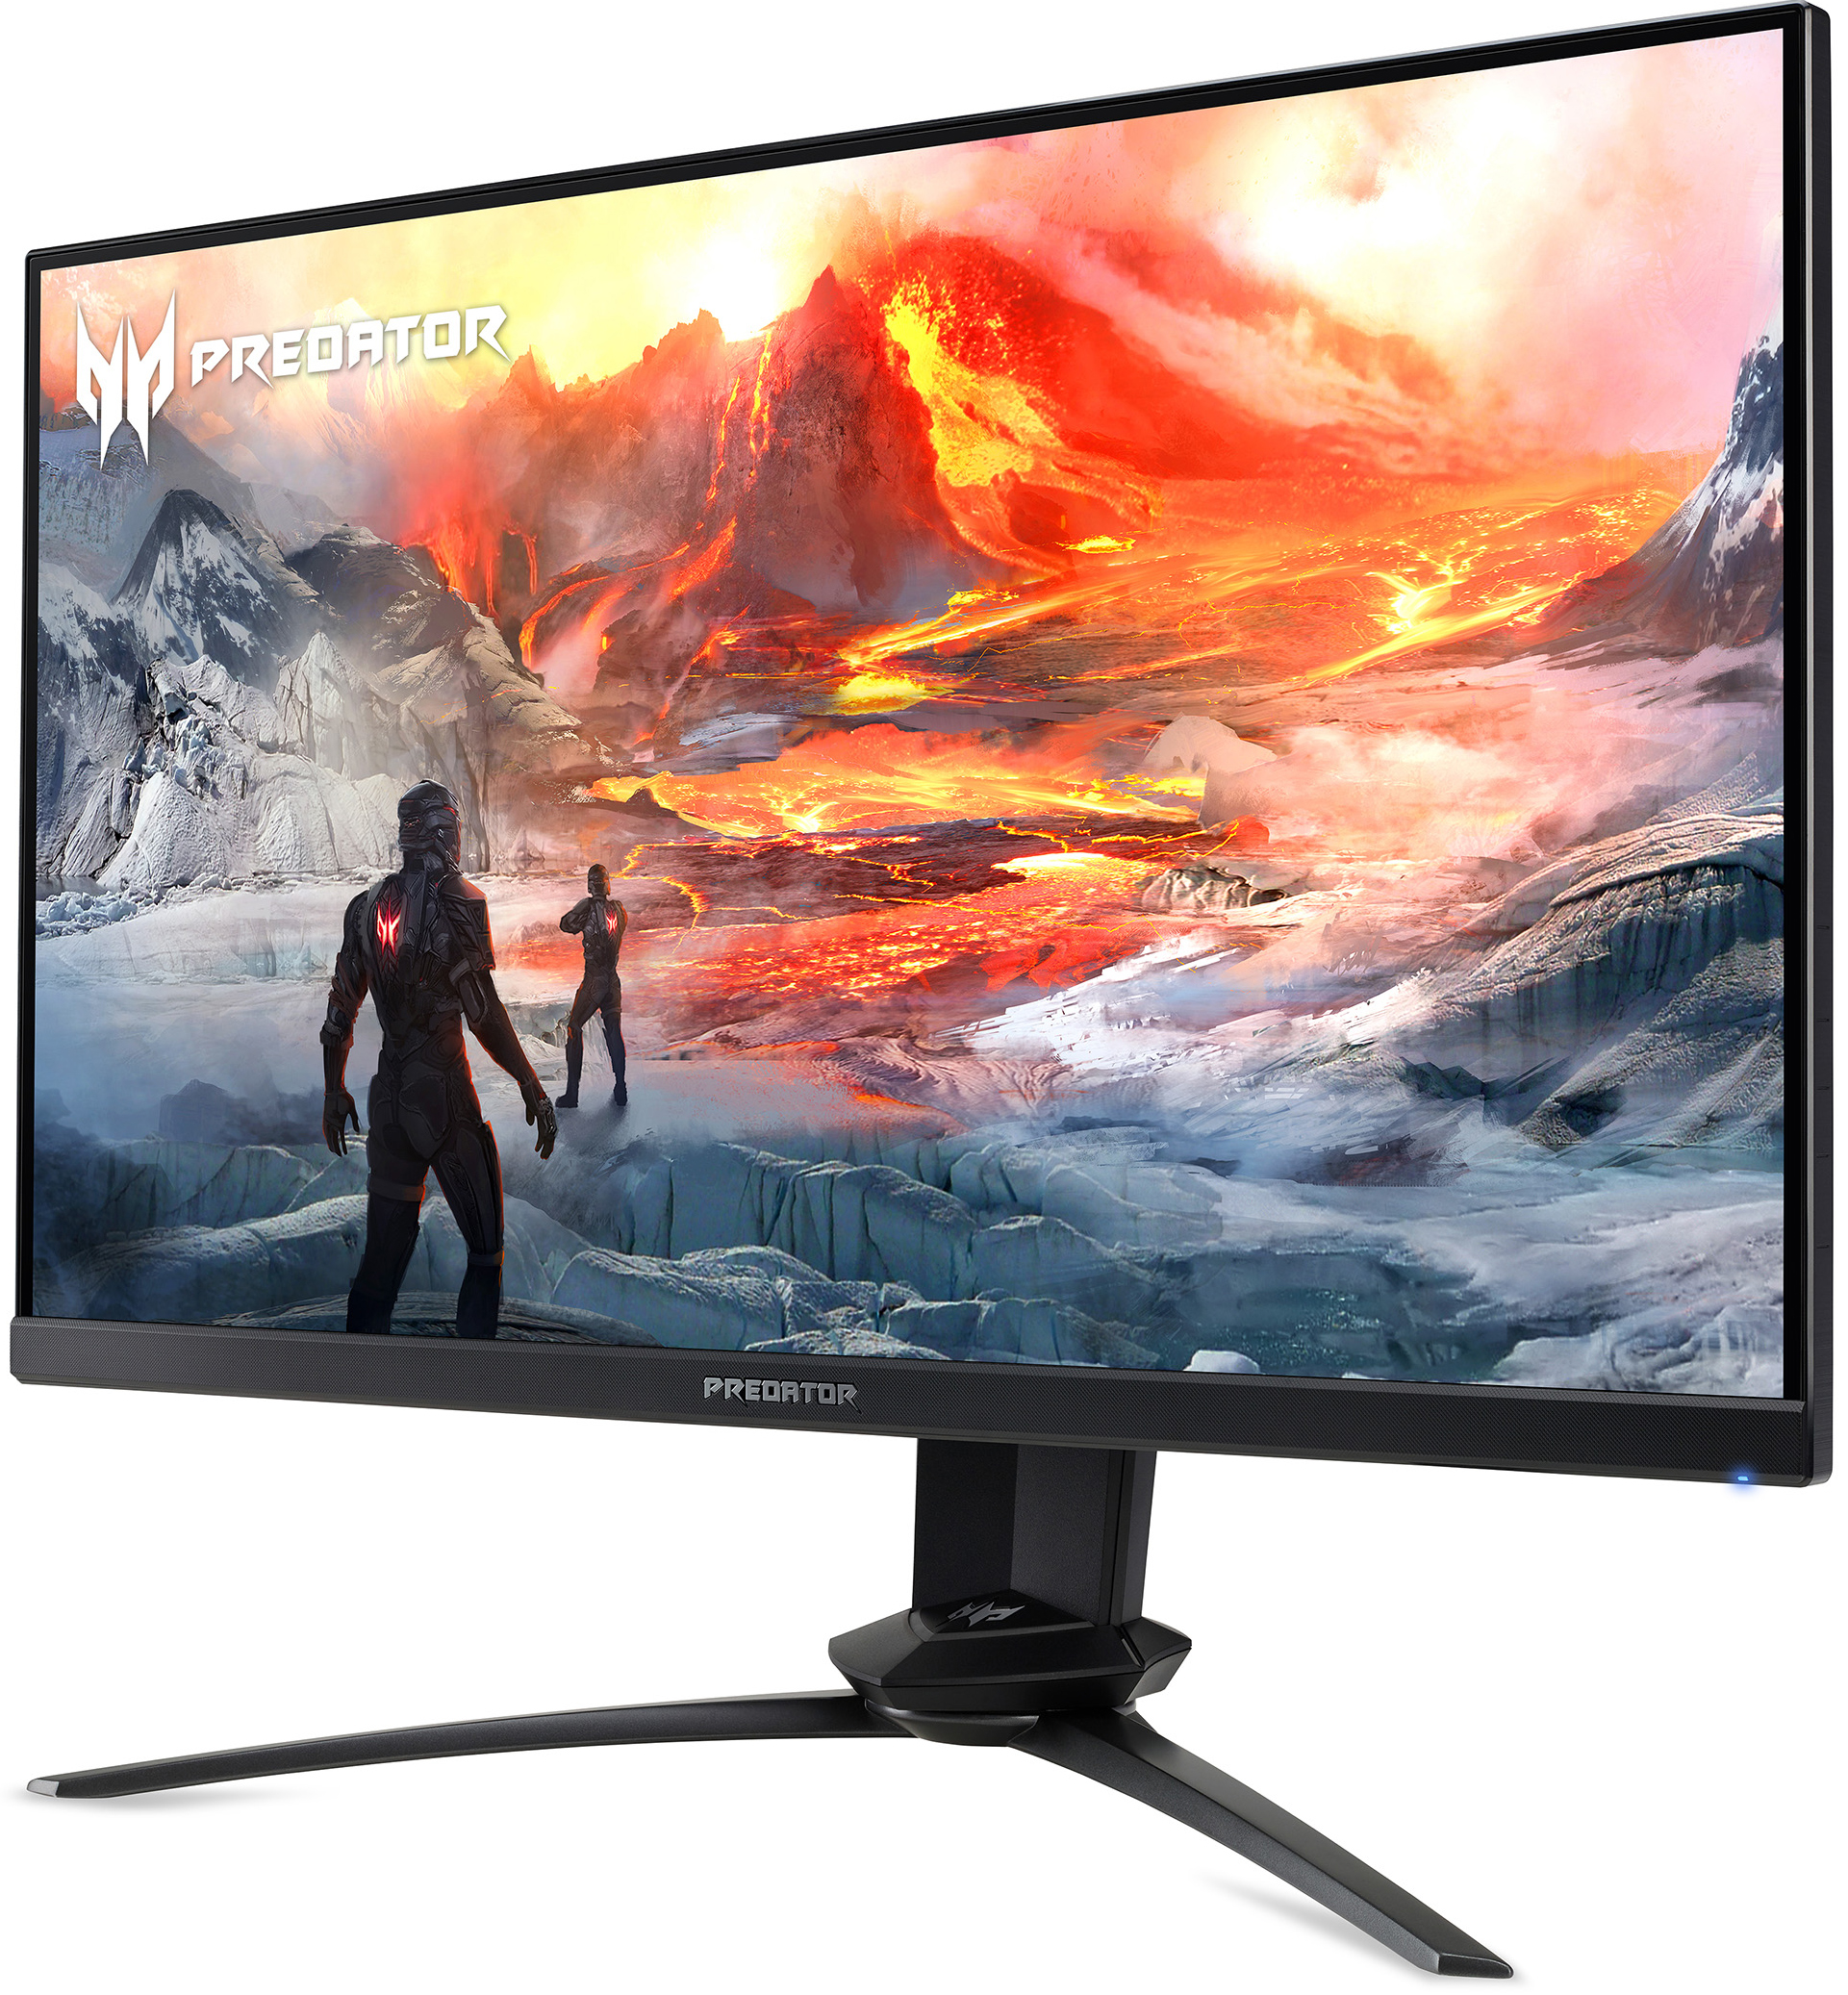 Acer Launches Predator 253qx Monitor With 240 Hz 0 4 Ms G2g Response Time